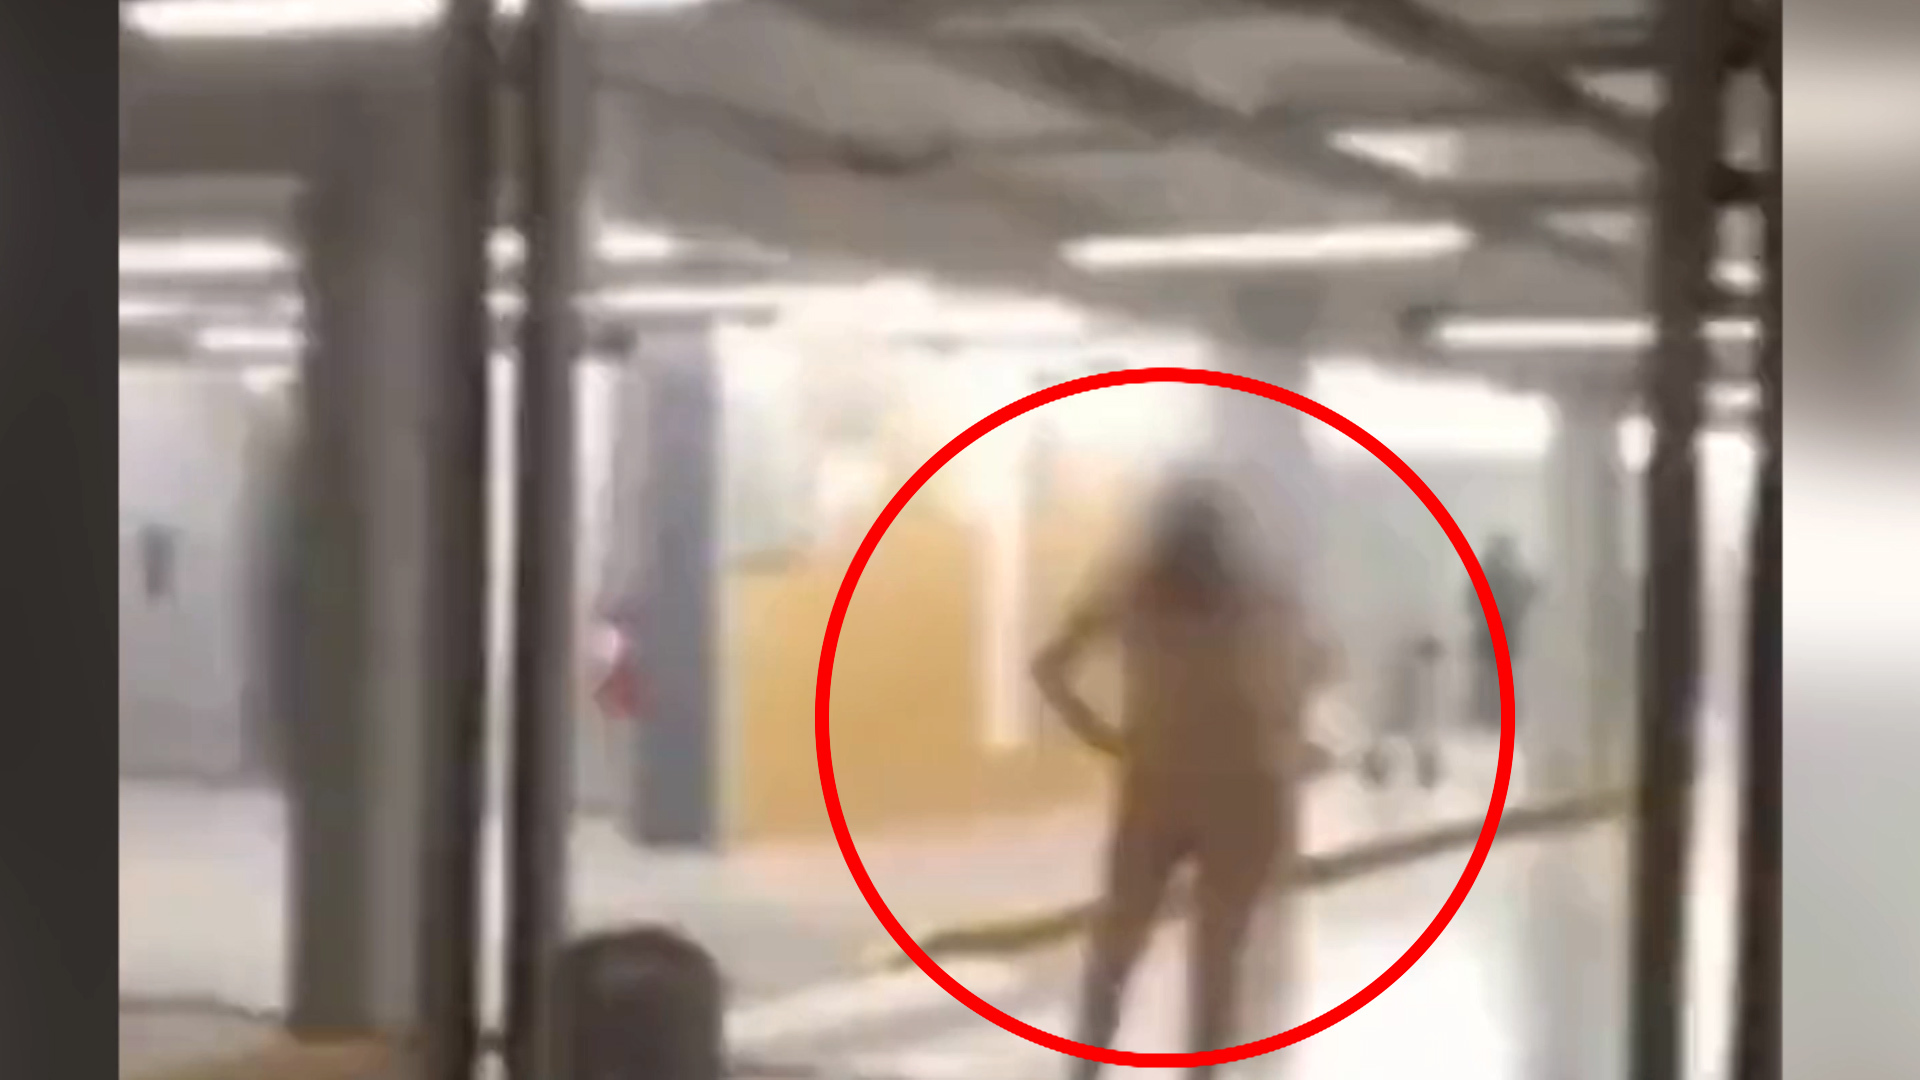 Naked woman attacks Chilean airport passengers after taking hallucinogenic mushrooms